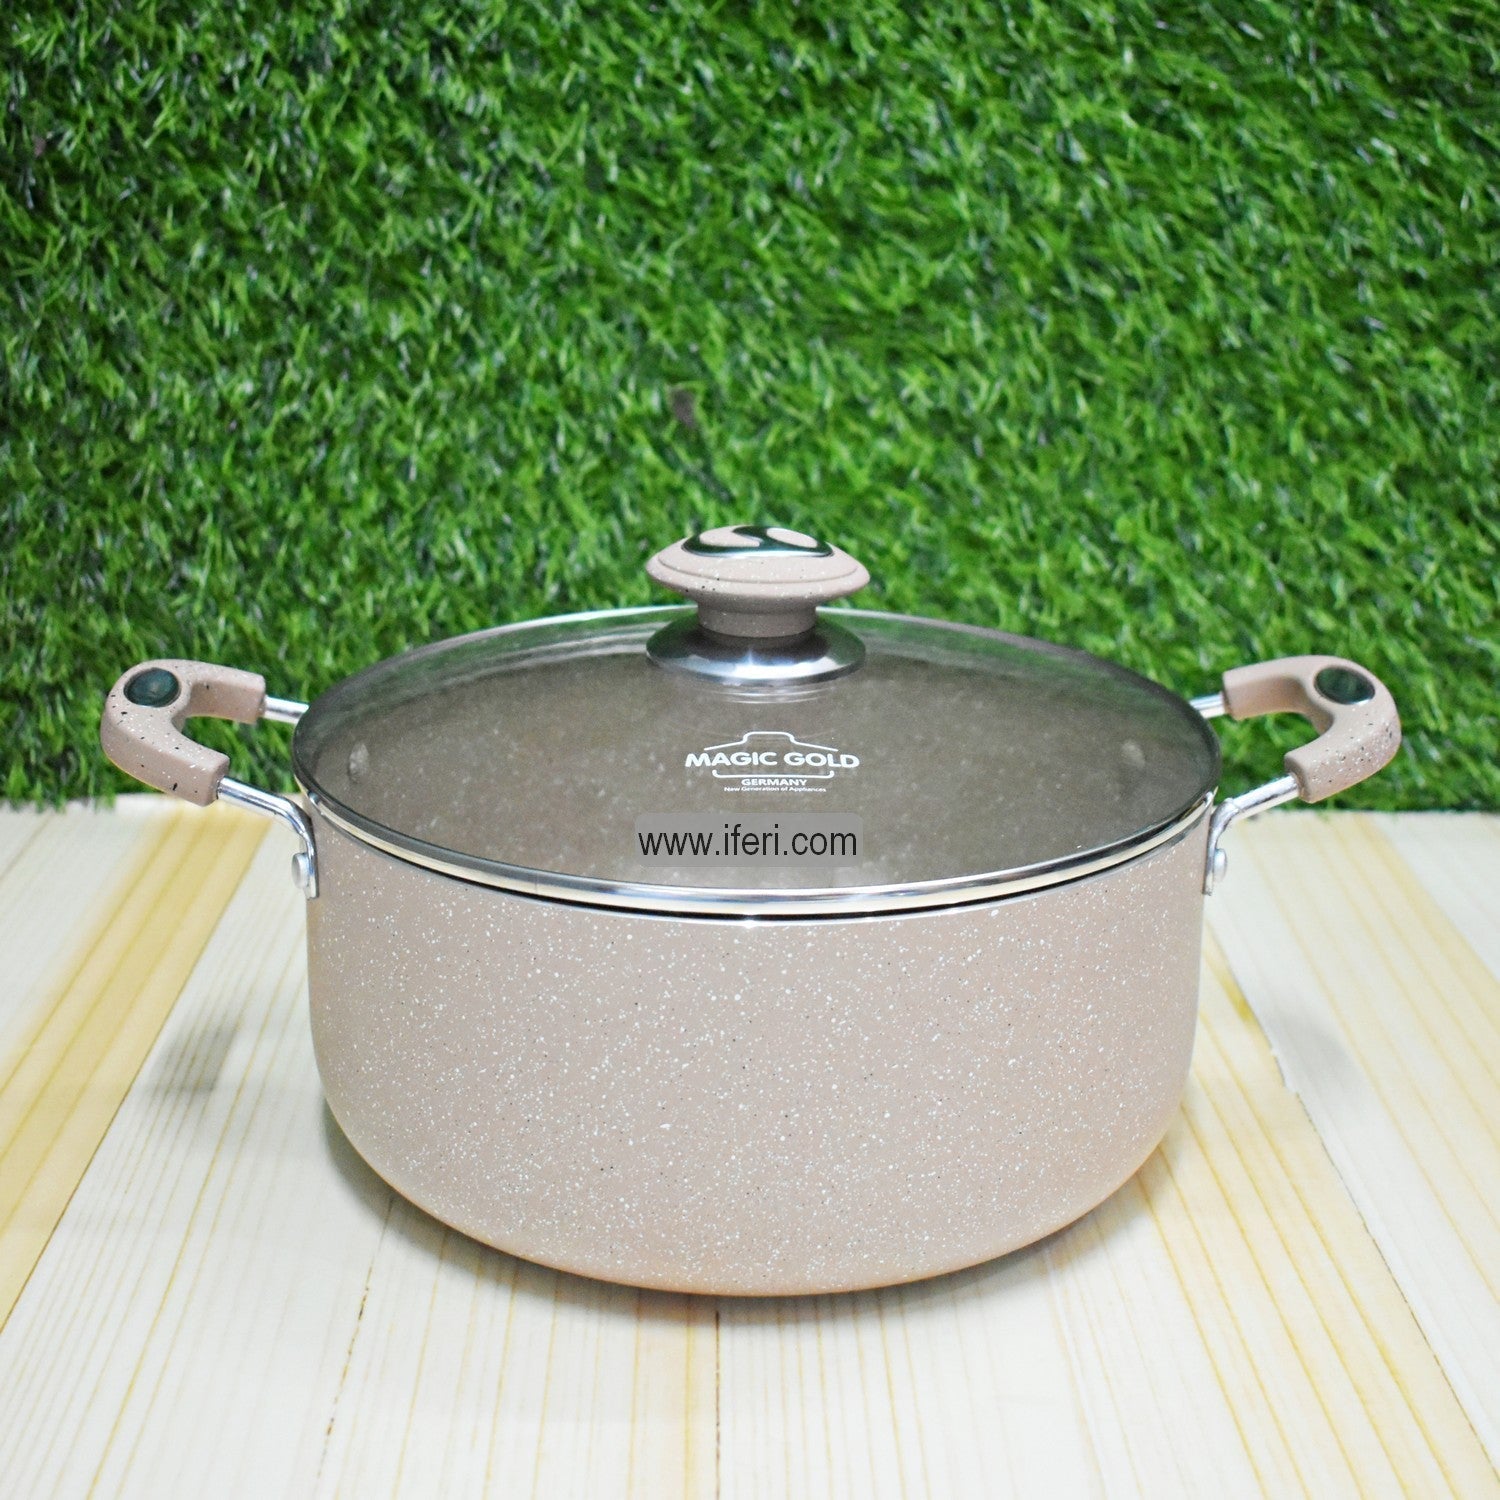 32 cm Magic Gold Non-stick Cookware with Lid TG00094